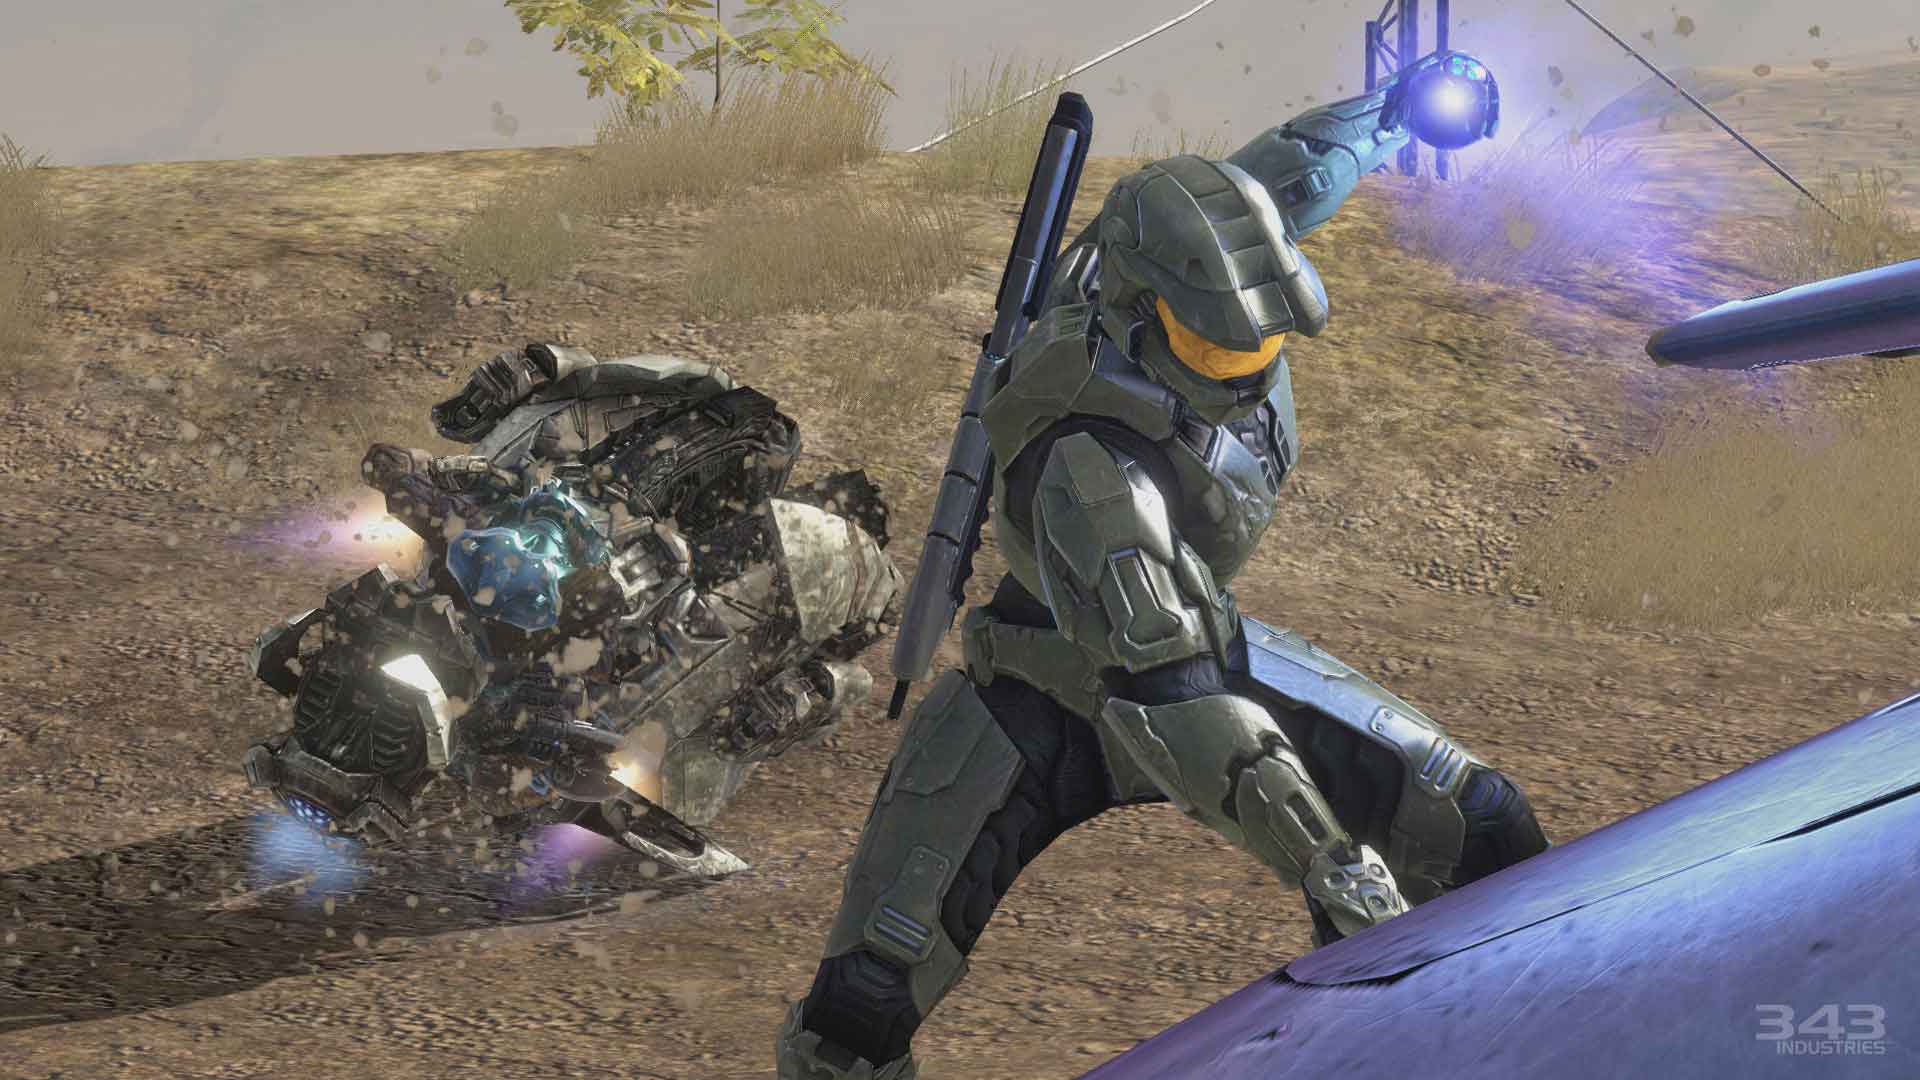 Do move fast how in 3? you halo Weapons